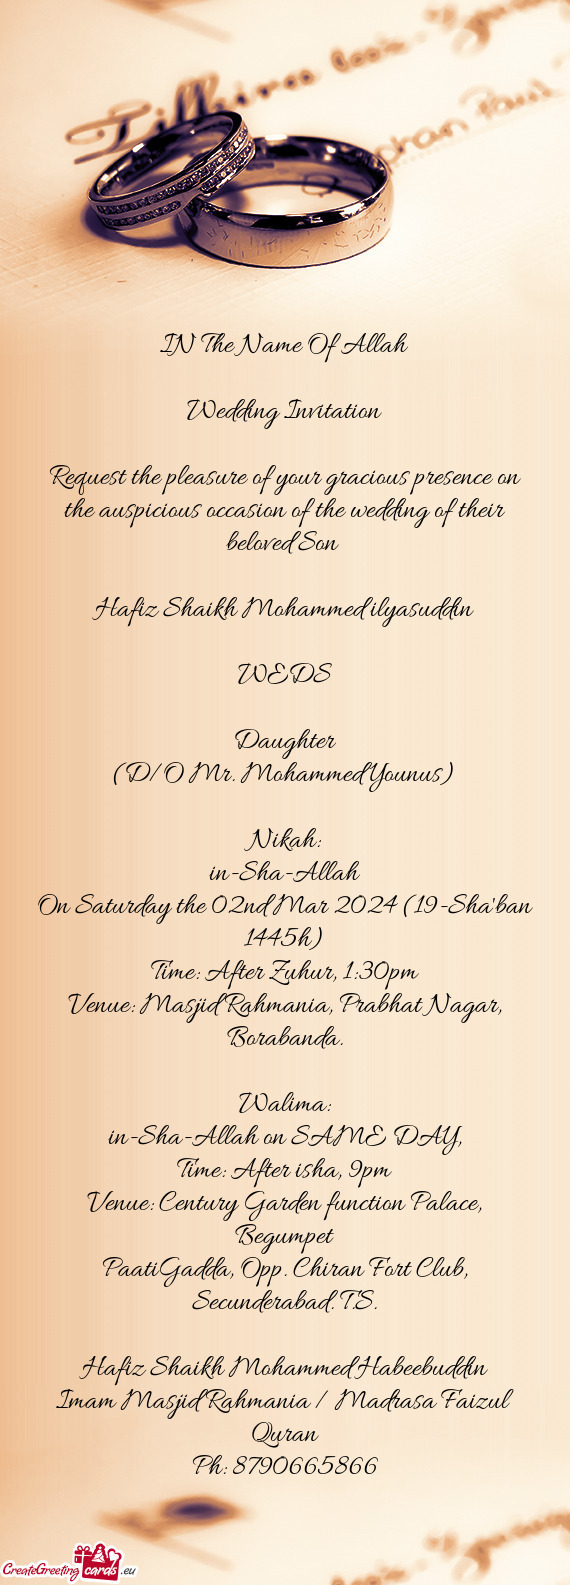 Request the pleasure of your gracious presence on the auspicious occasion of the wedding of their be